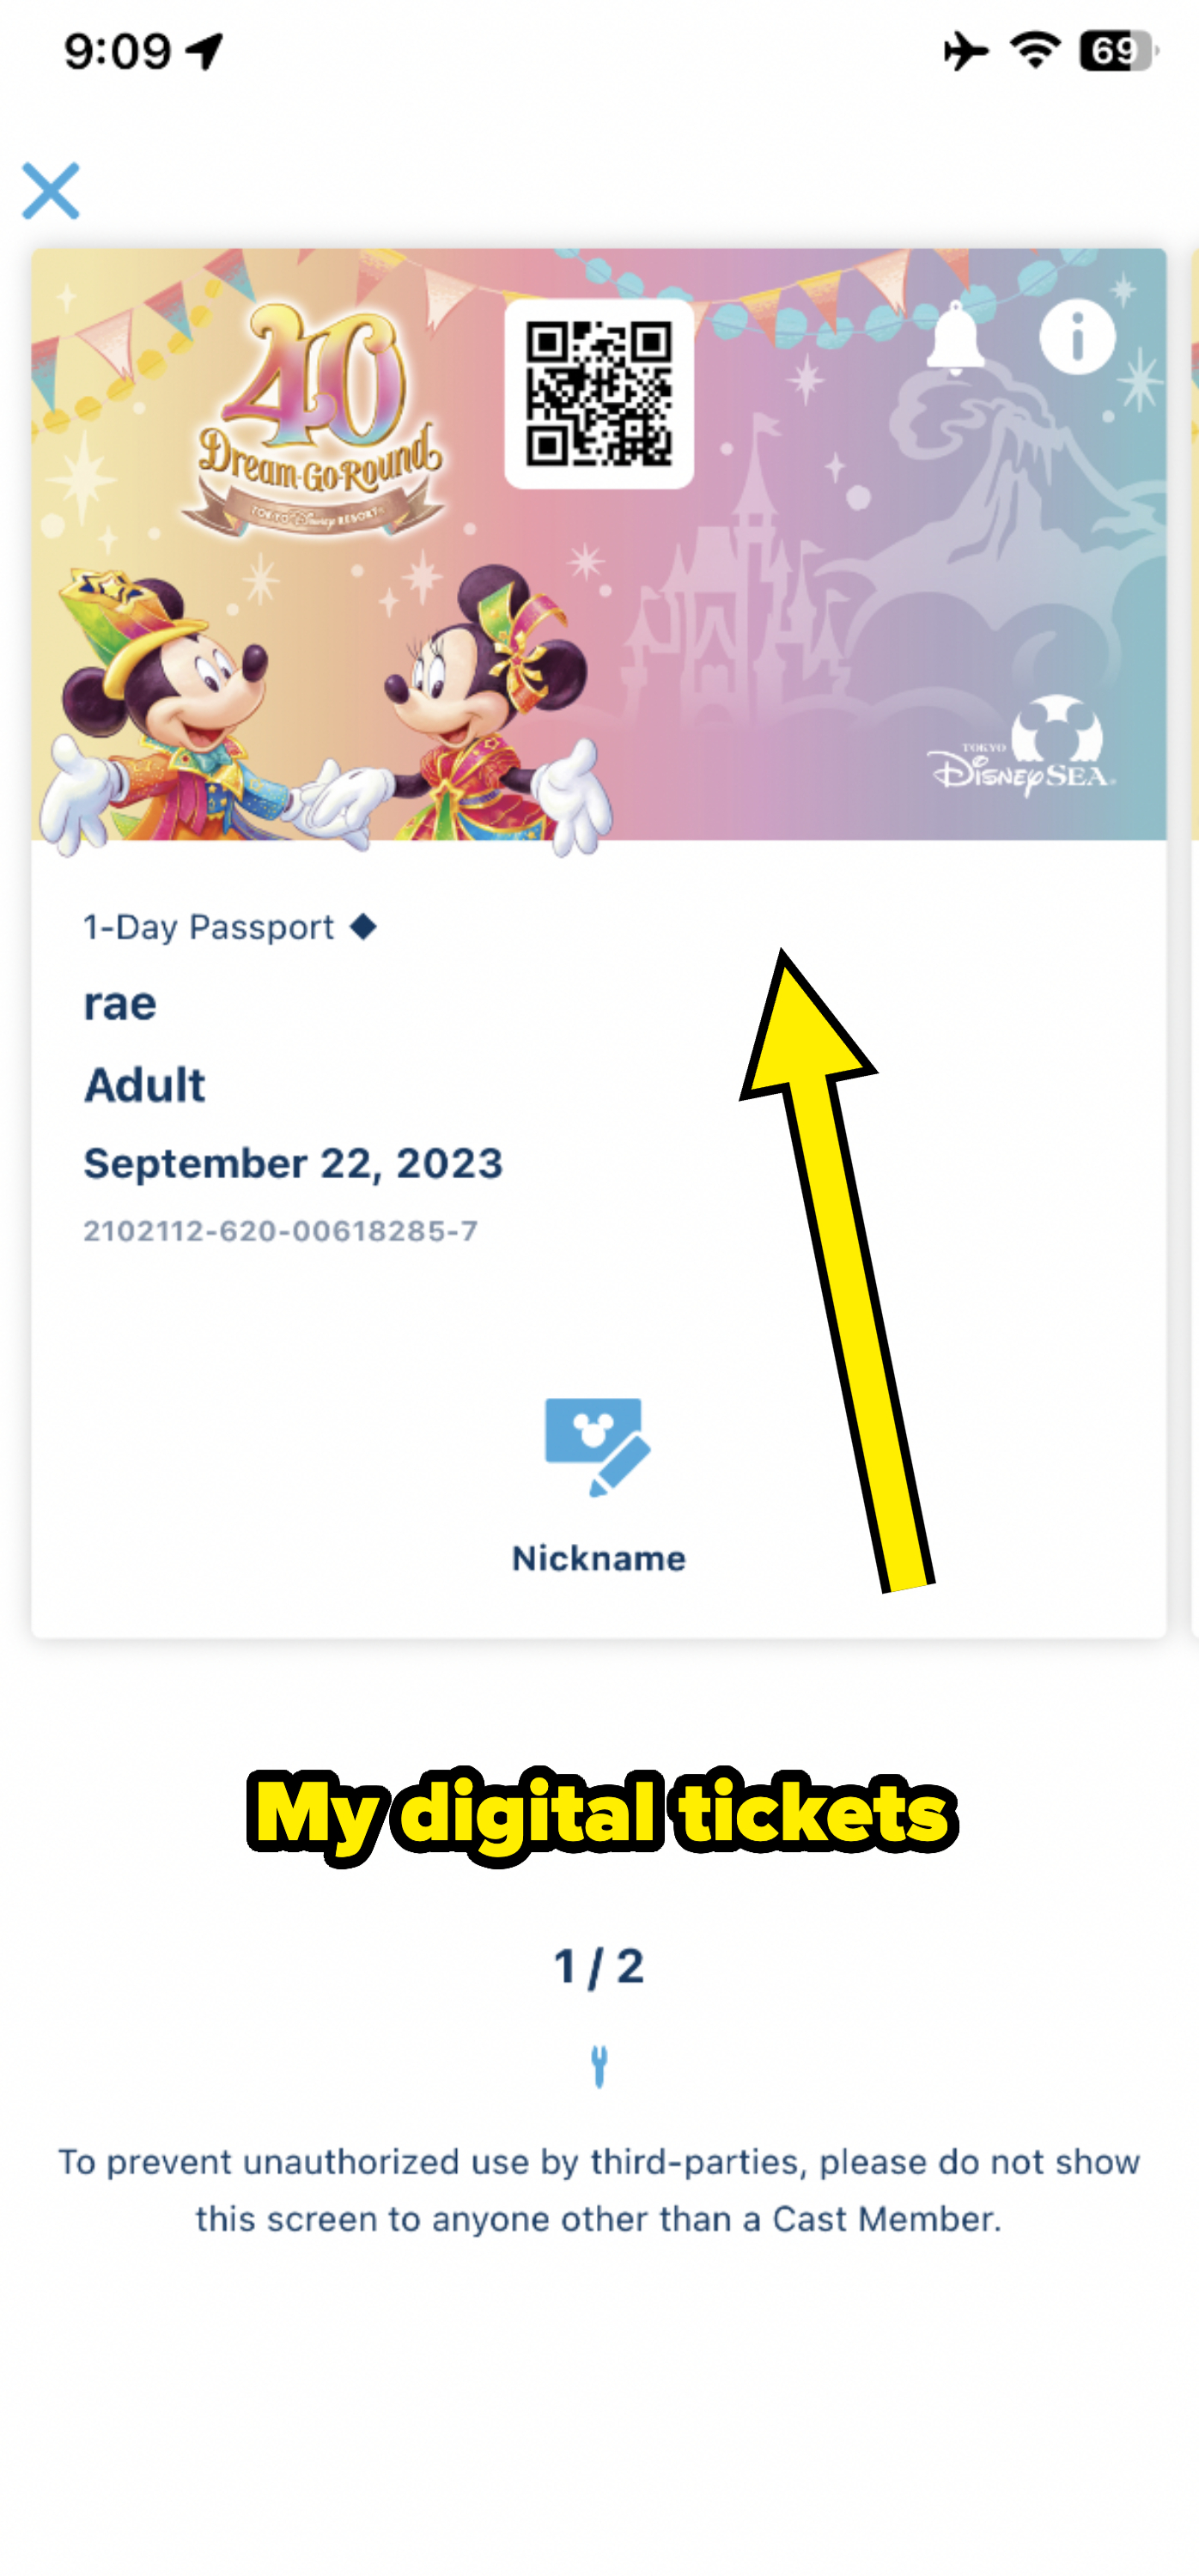 DisneySEA 1-Day Passport for an adult named rae, valid on September 22, 2023. The ticket features Mickey and Minnie Mouse dressed in park attire